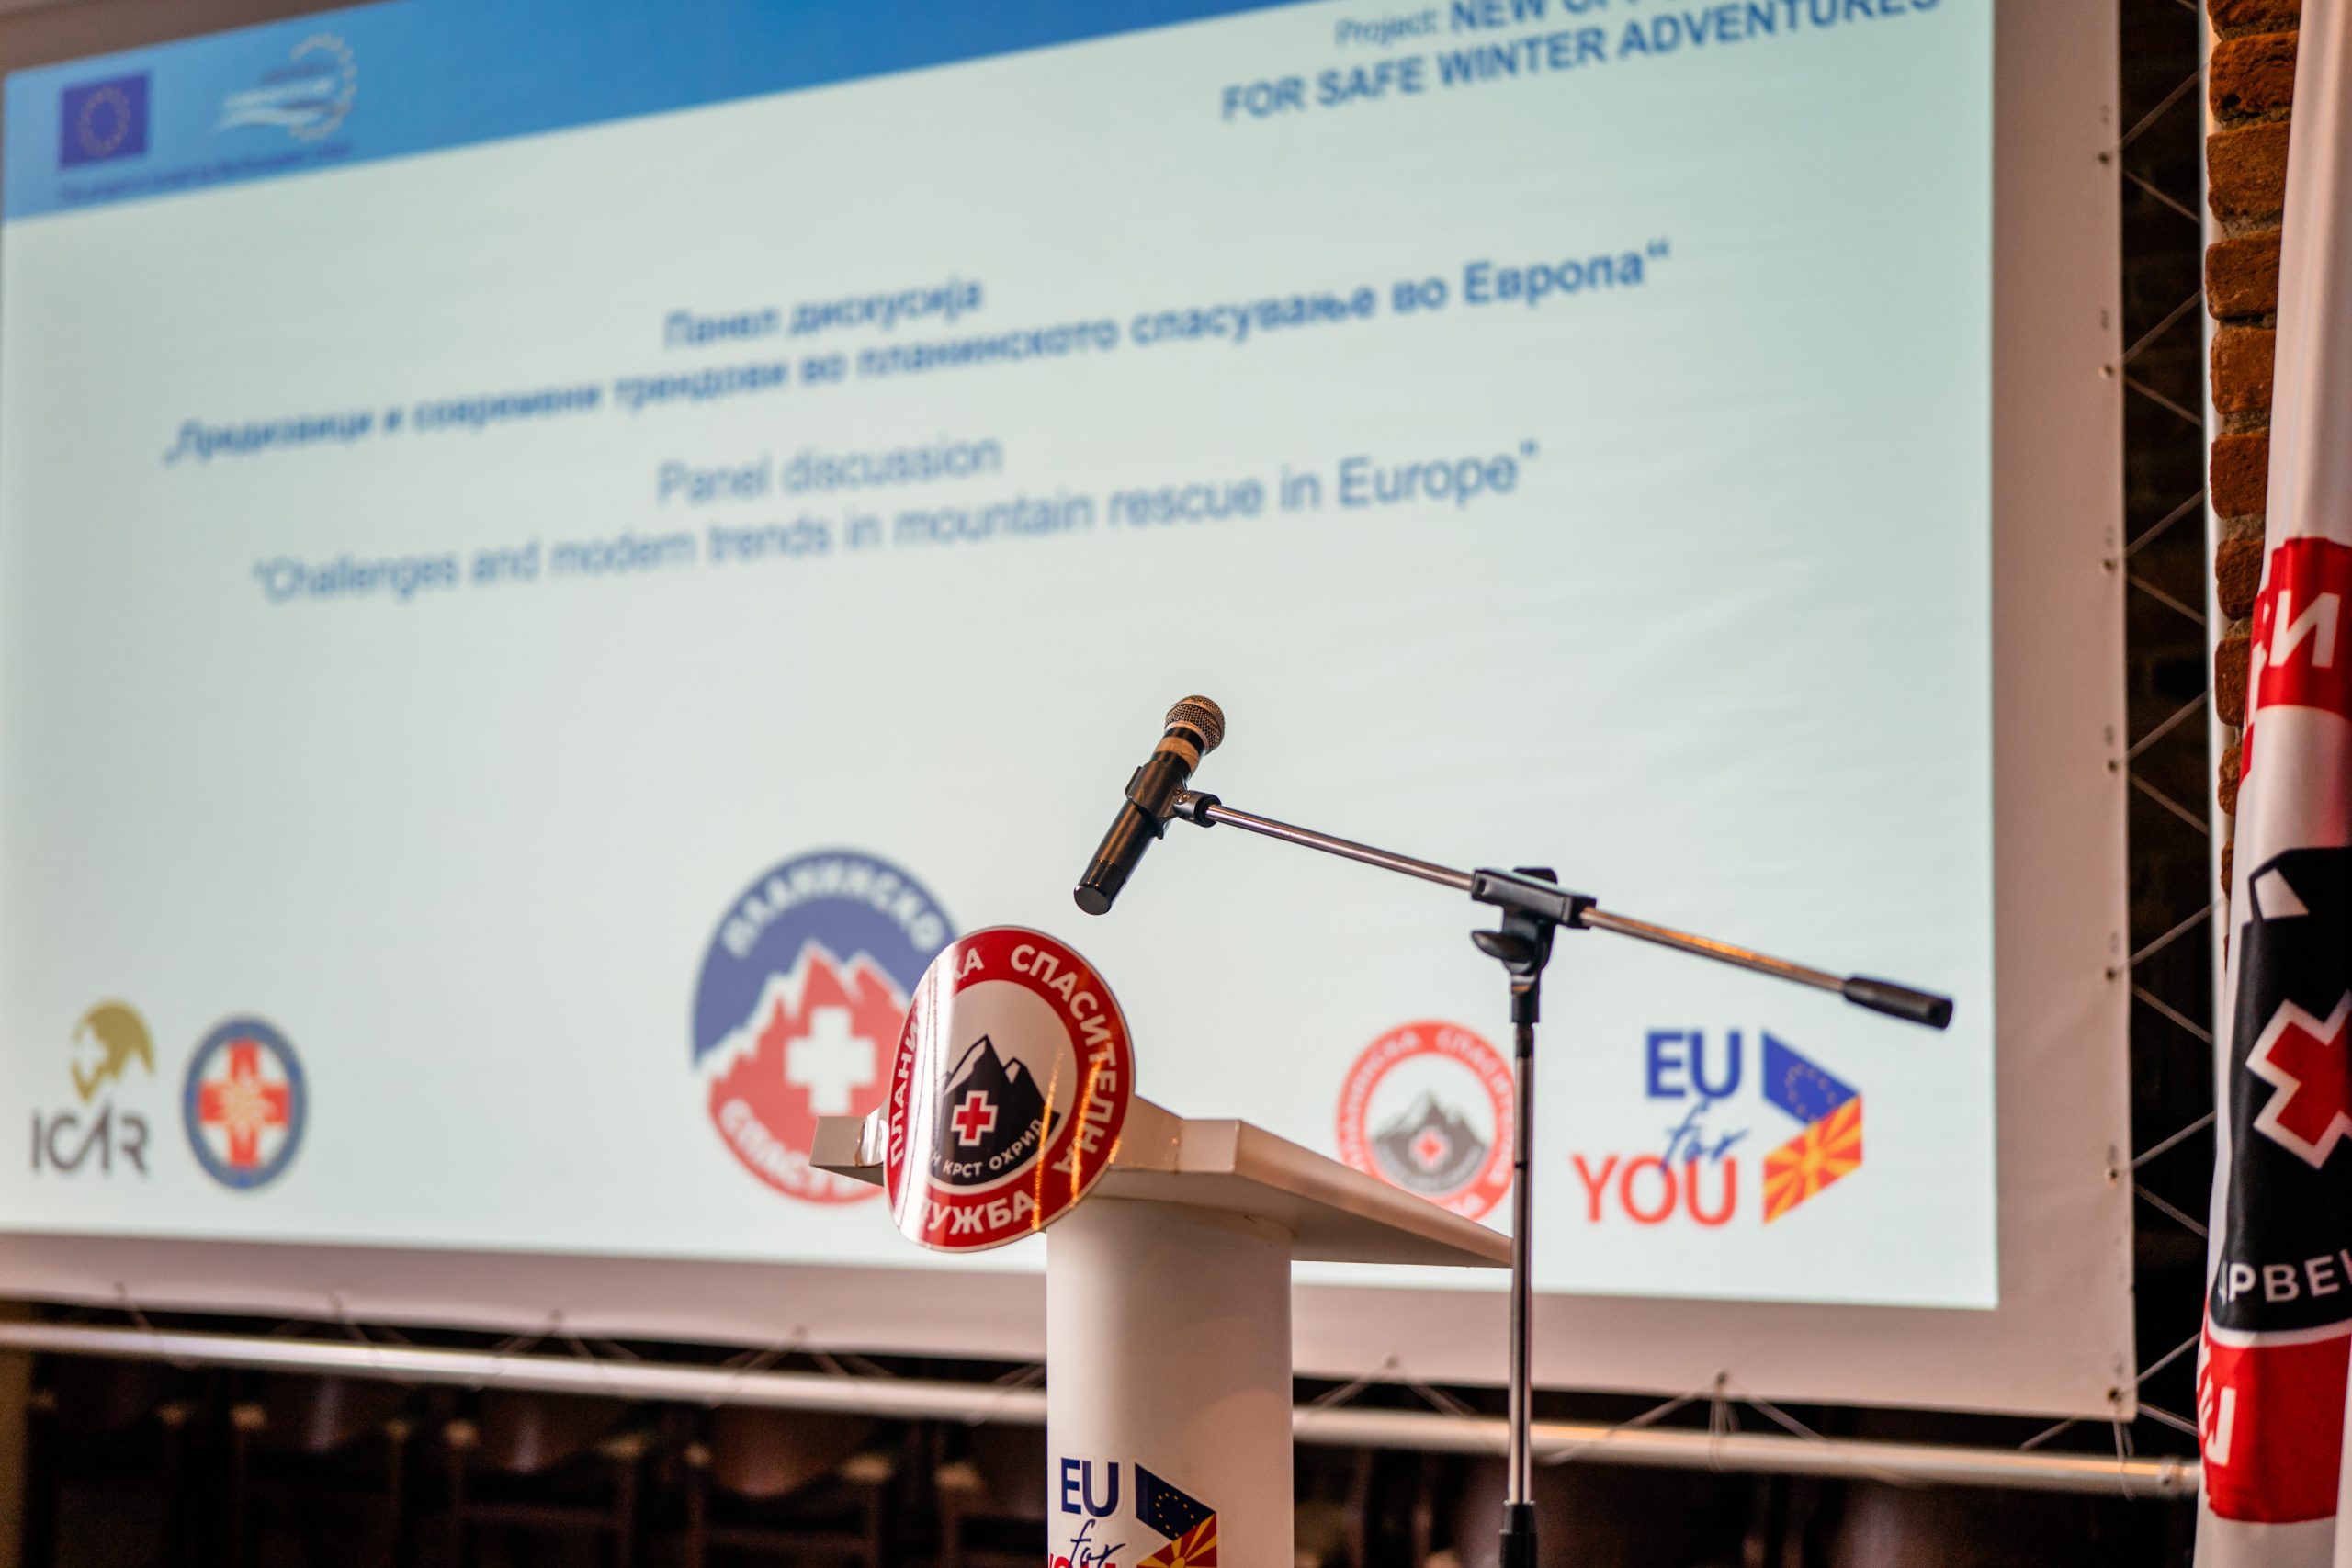 Panel discussion: Challenges and modern trends in mountain rescue in Europe